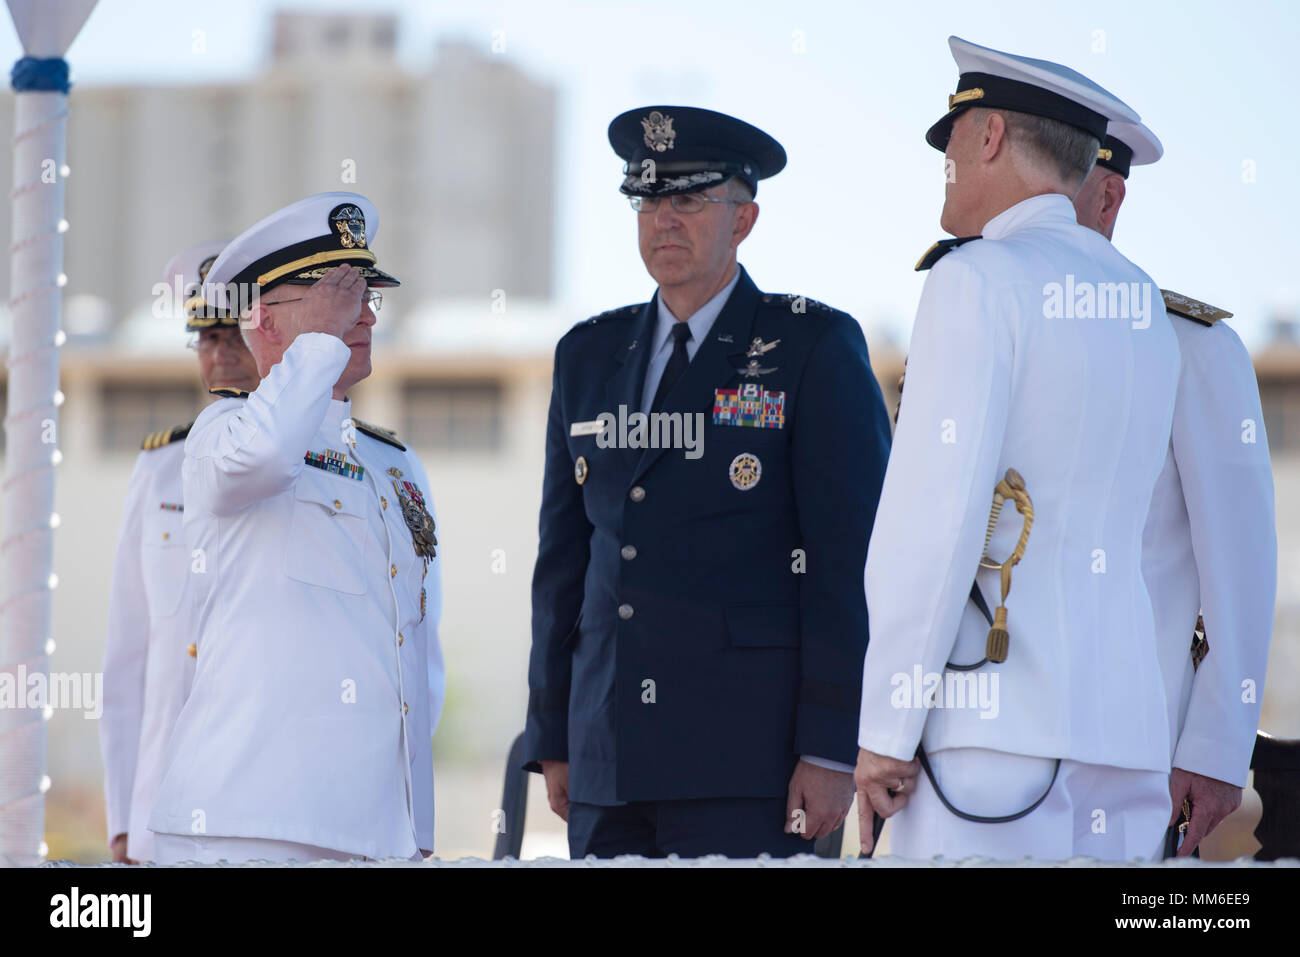 Rear Adm Roegge High Resolution Stock Photography And Images Alamy